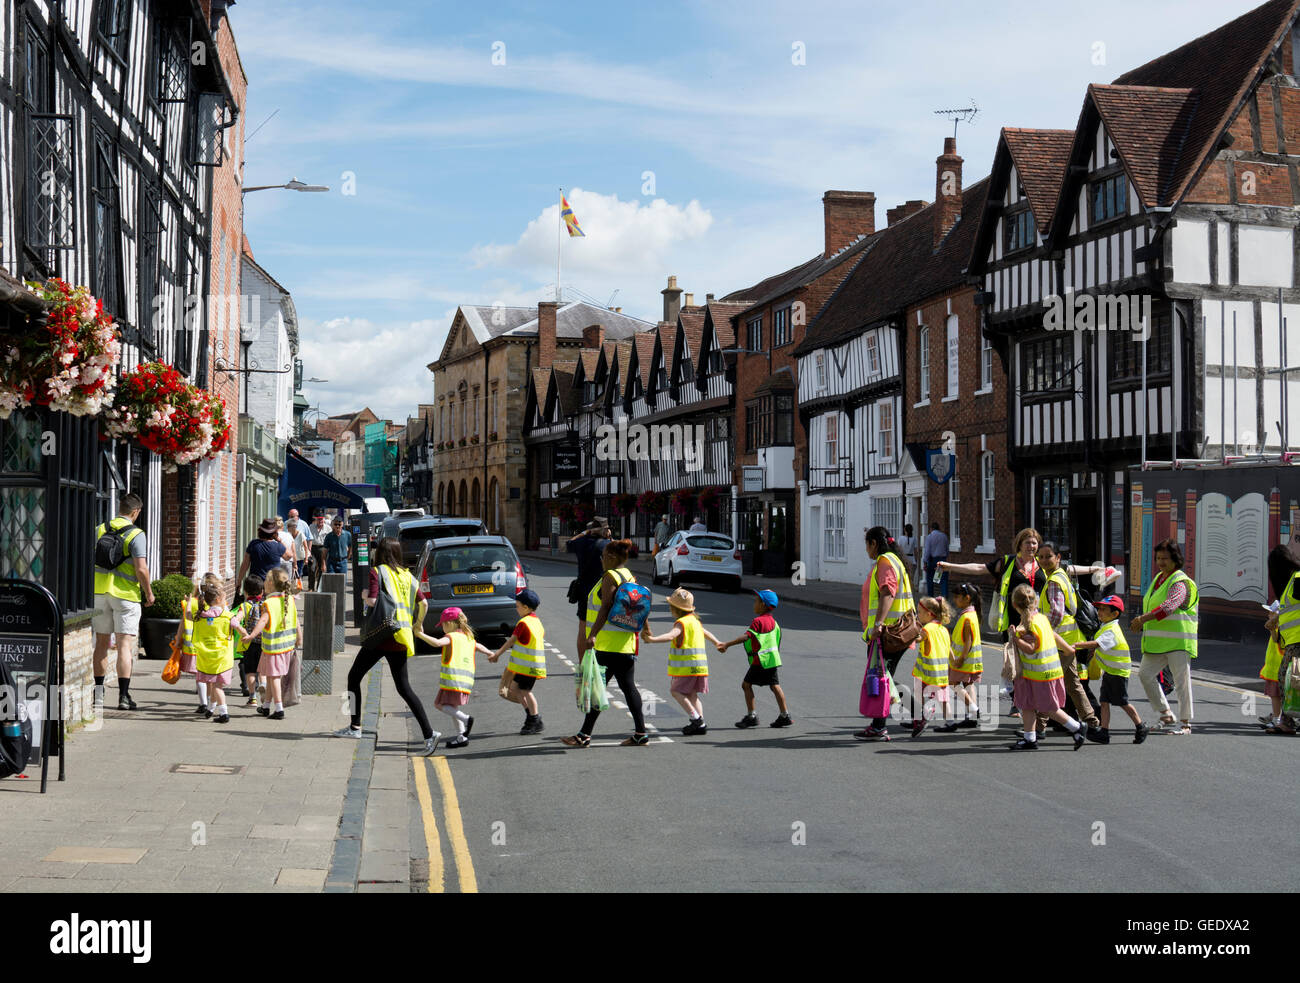 Children in high visibility waistcoats being led across a street, Stratford-upon-Avon, UK Stock Photo